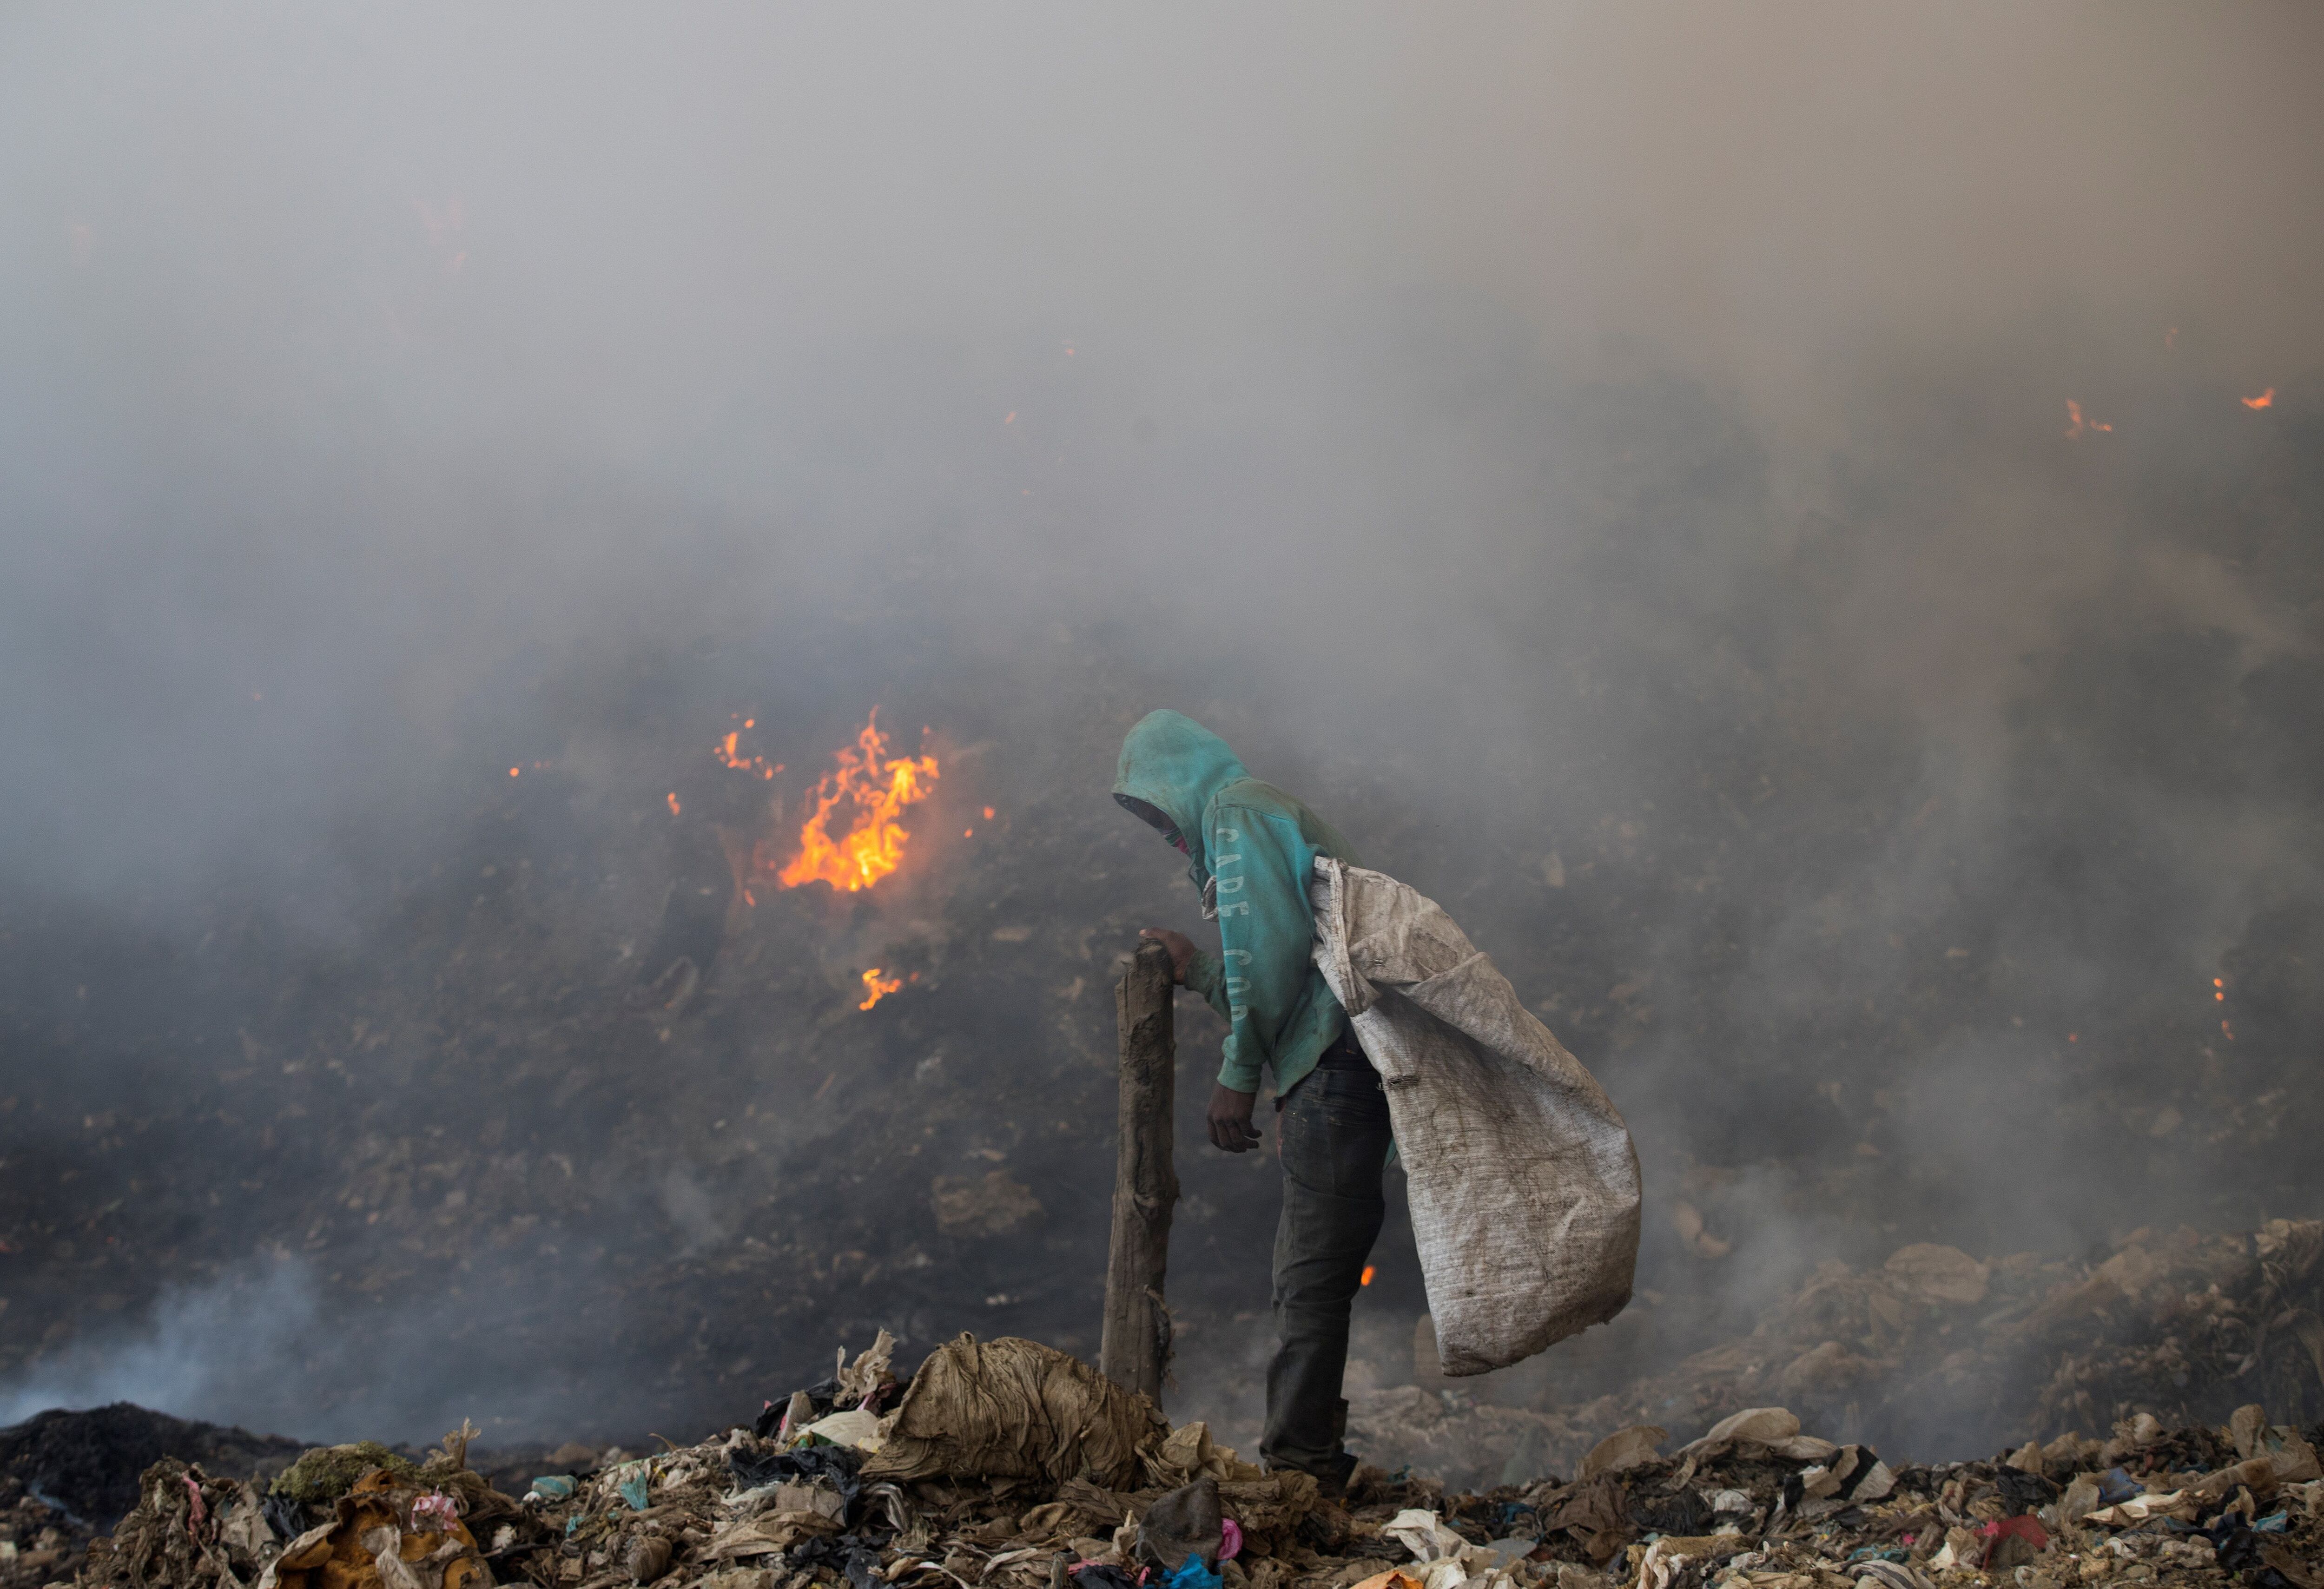 A worker sifts through garbage during the massive Duquesa landfill fire in April 2020.